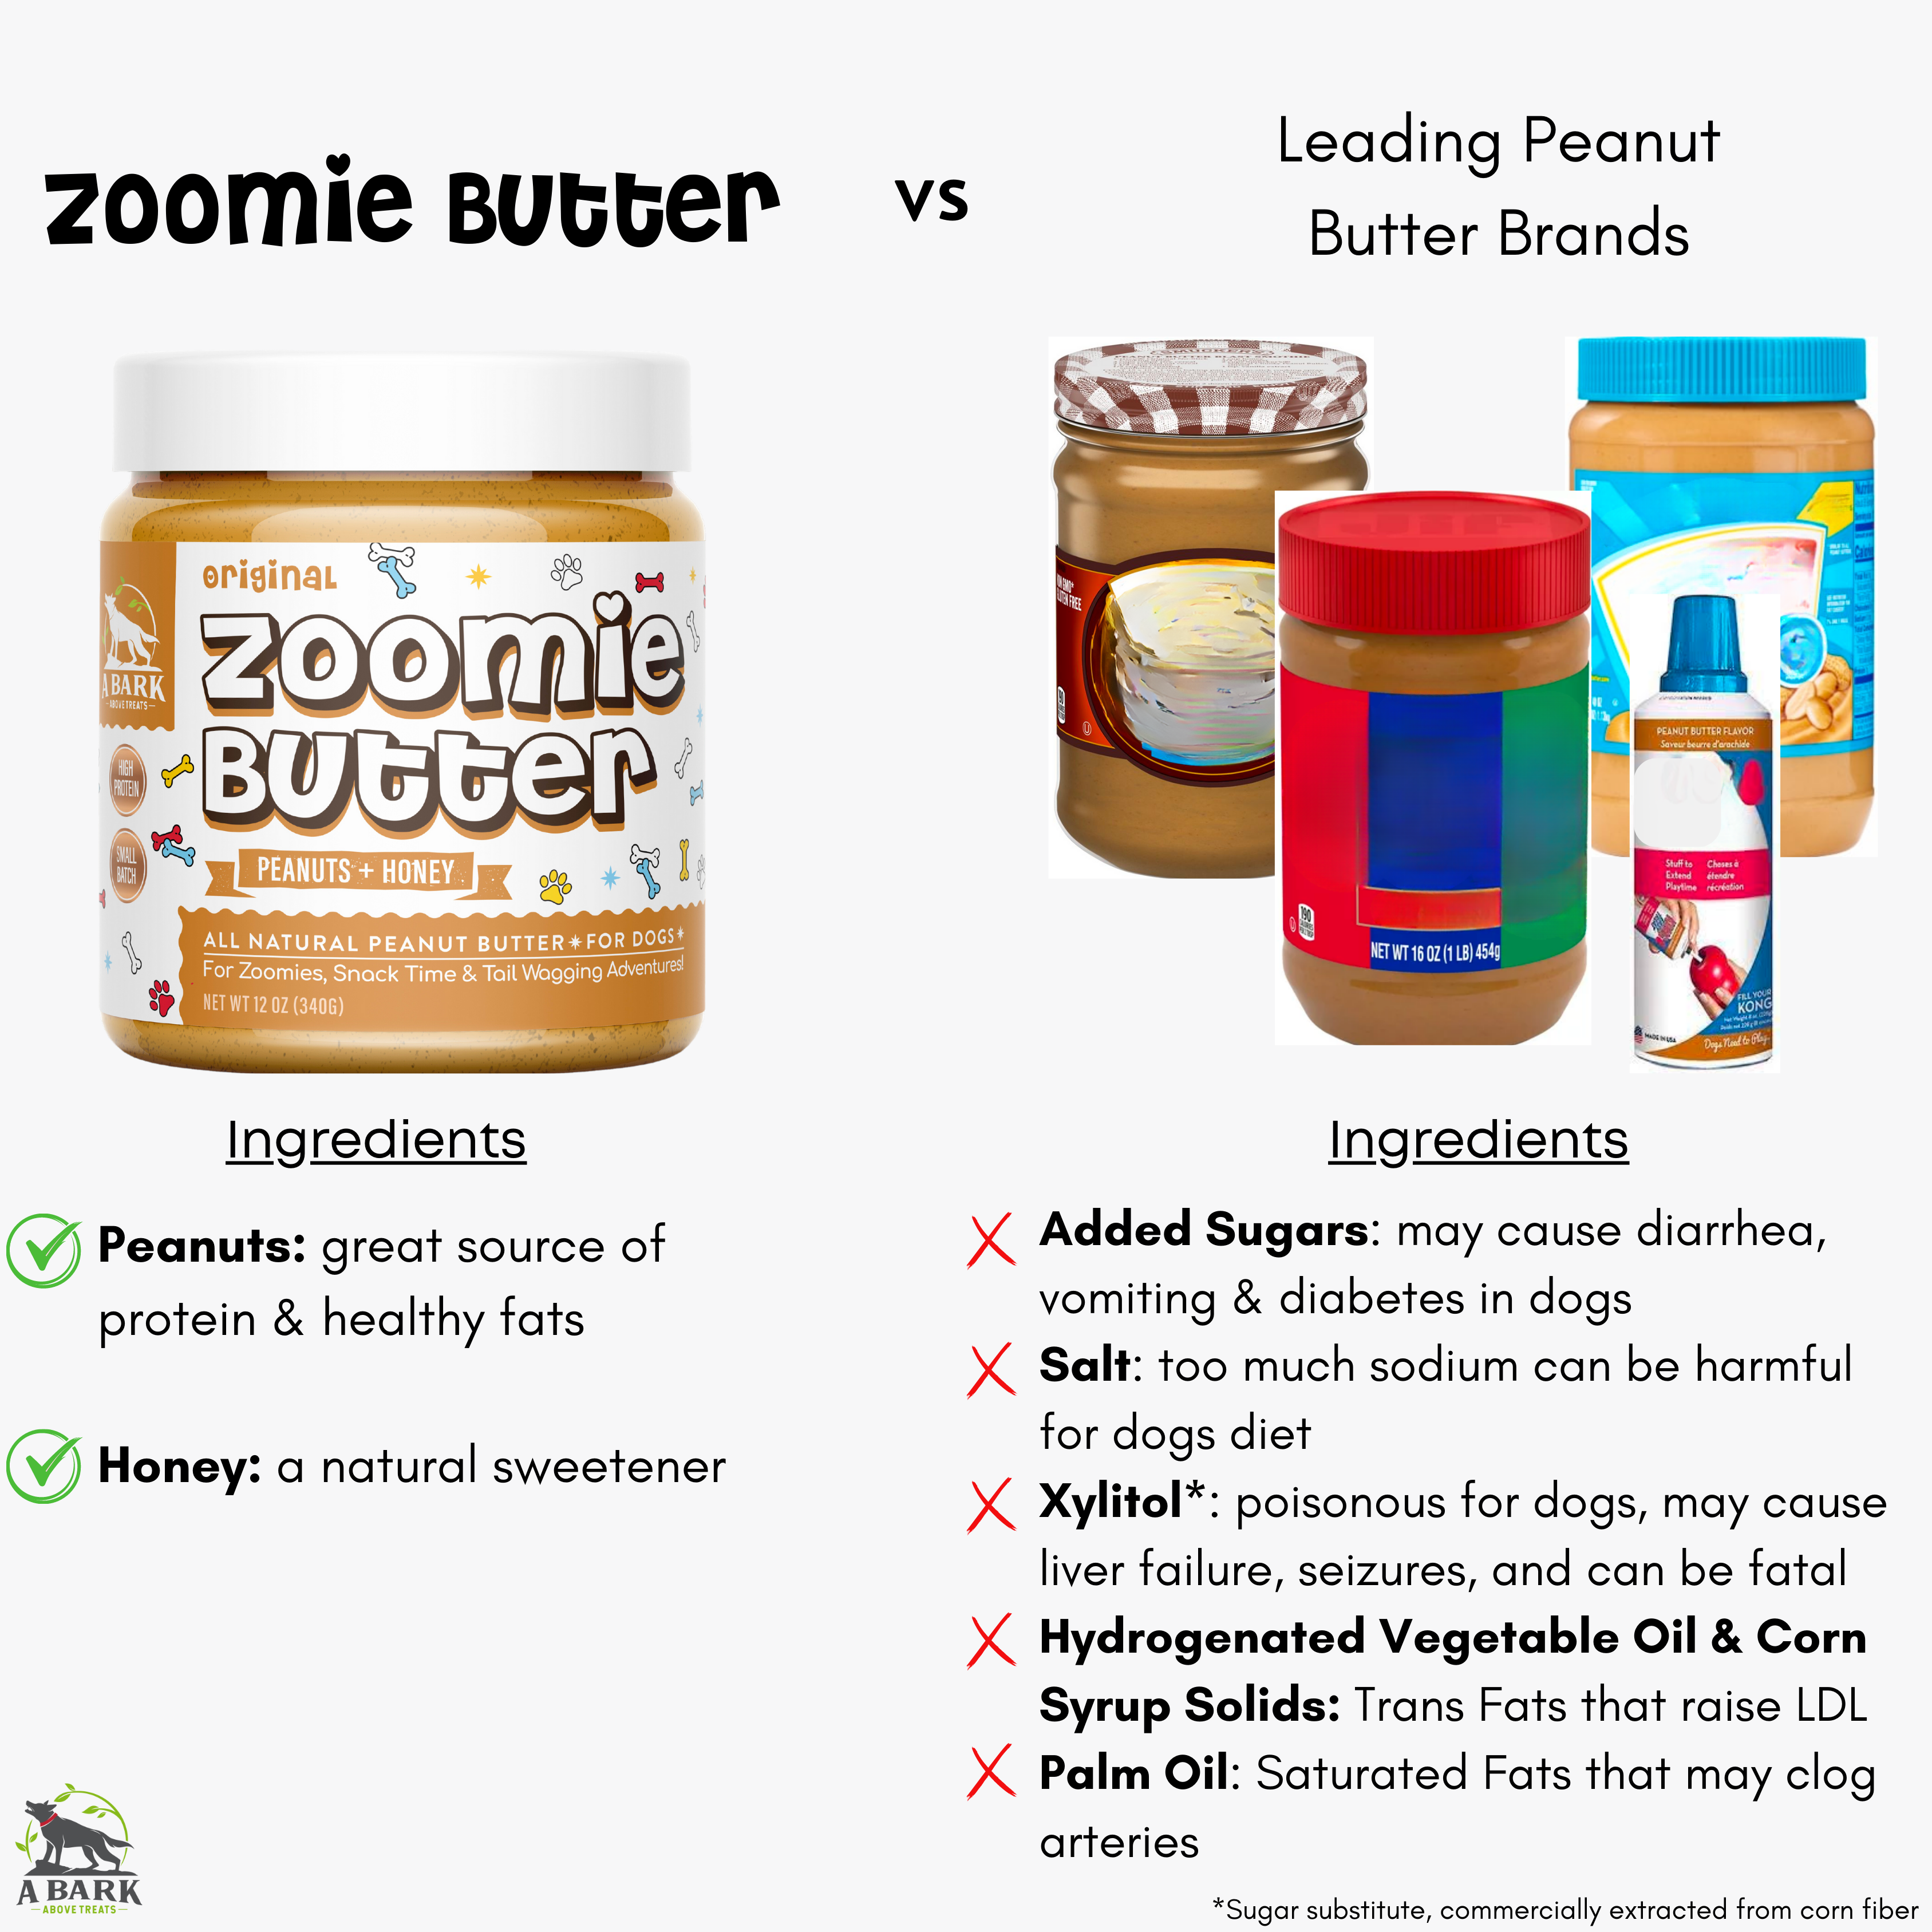 Bundle: Stress & Anxiety + Gut & Digestive Zoomie Butters